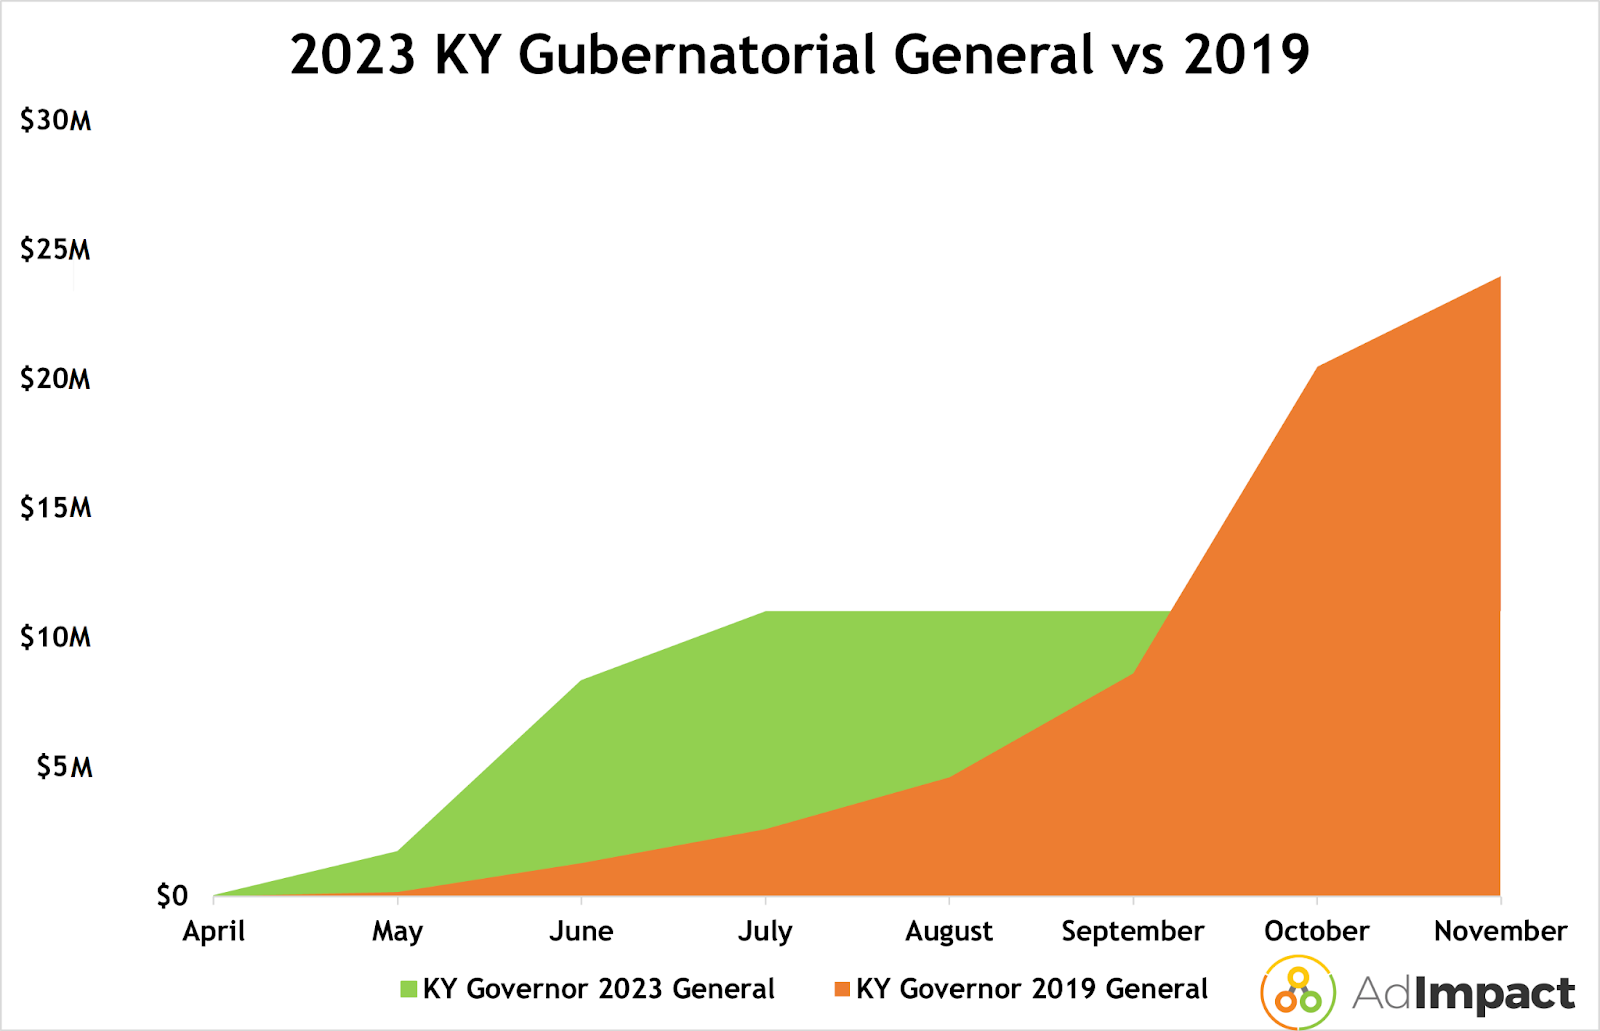 A area chart showing 2023's Kentucky gubernatorial general out pacing 2019's